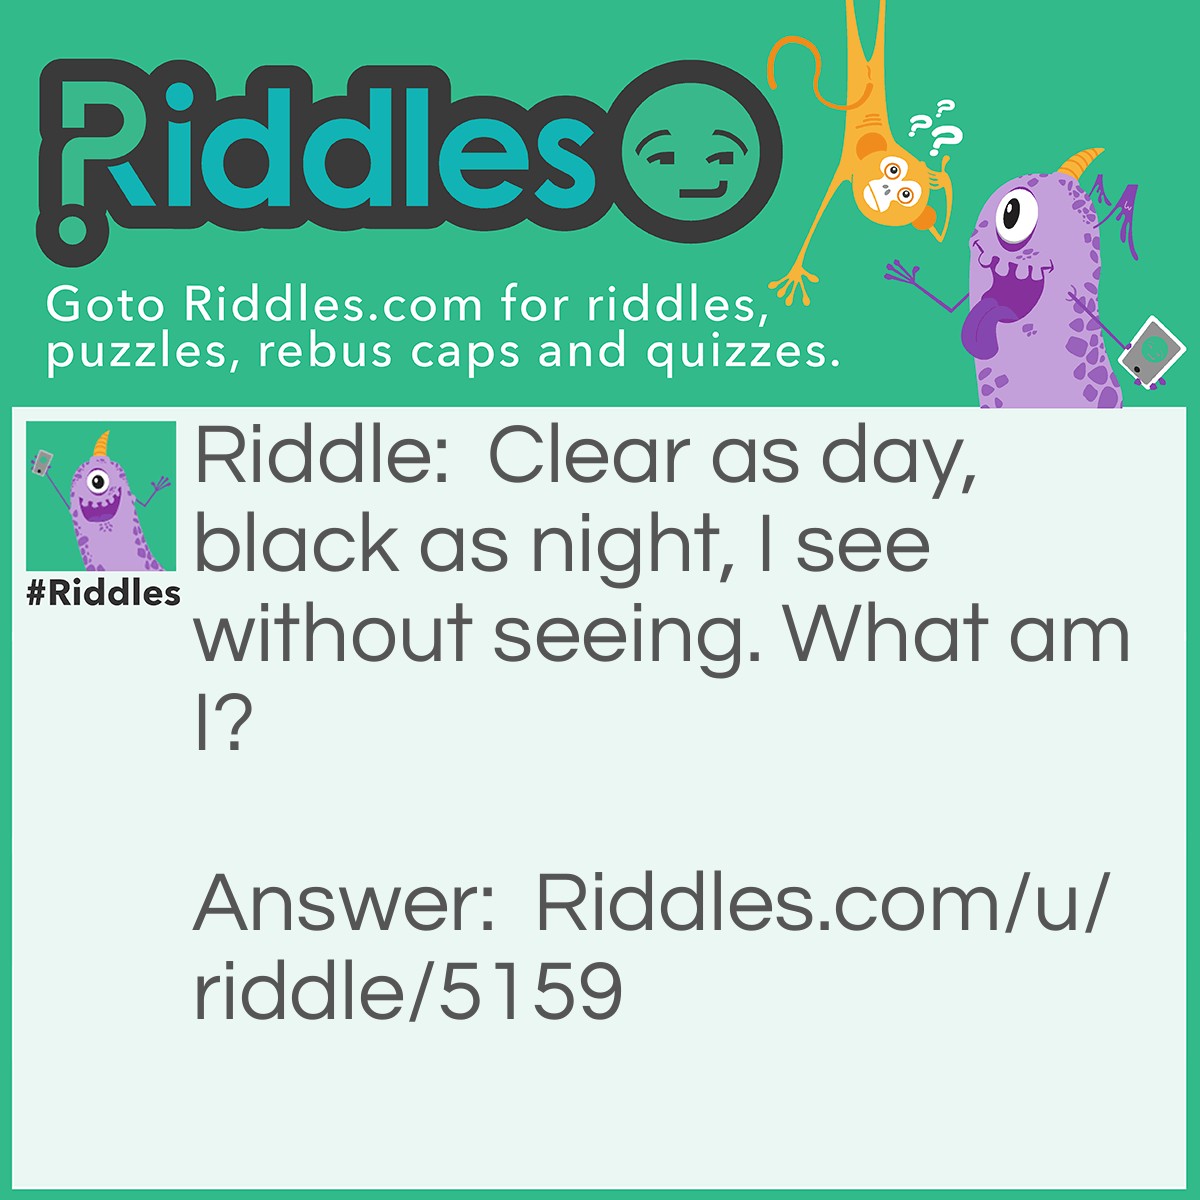 Riddle: Clear as day, black as night, I see without seeing. What am I? Answer: A bat.